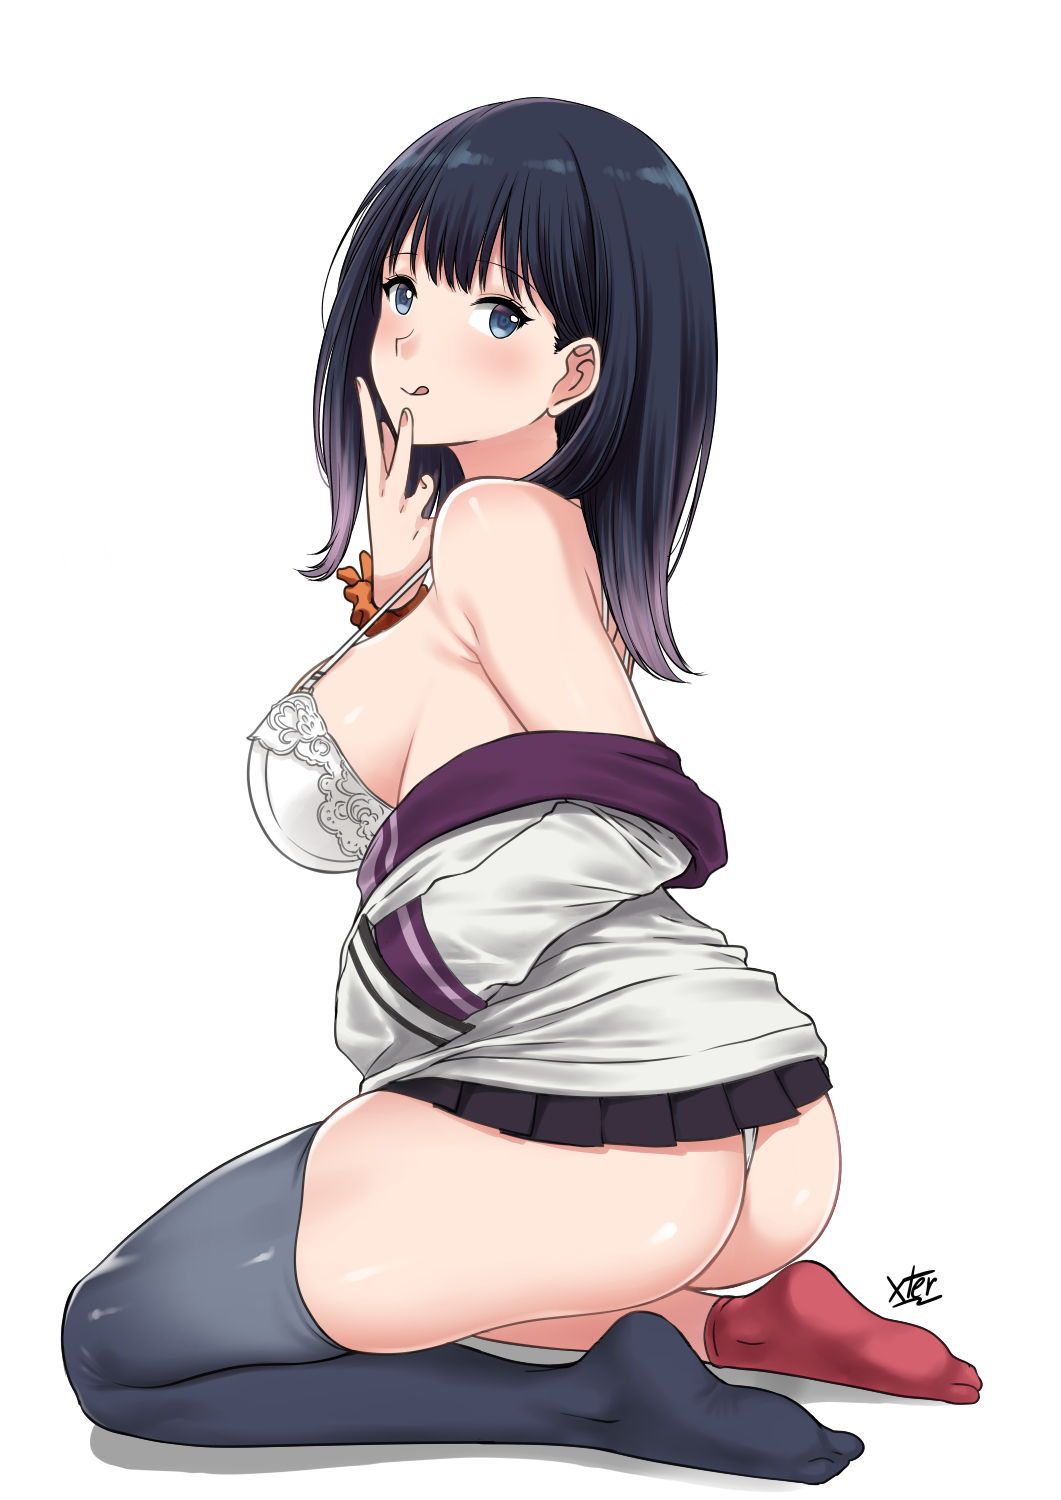 The image of SSSS.GRIDMAN that is too erotic is a foul! 13